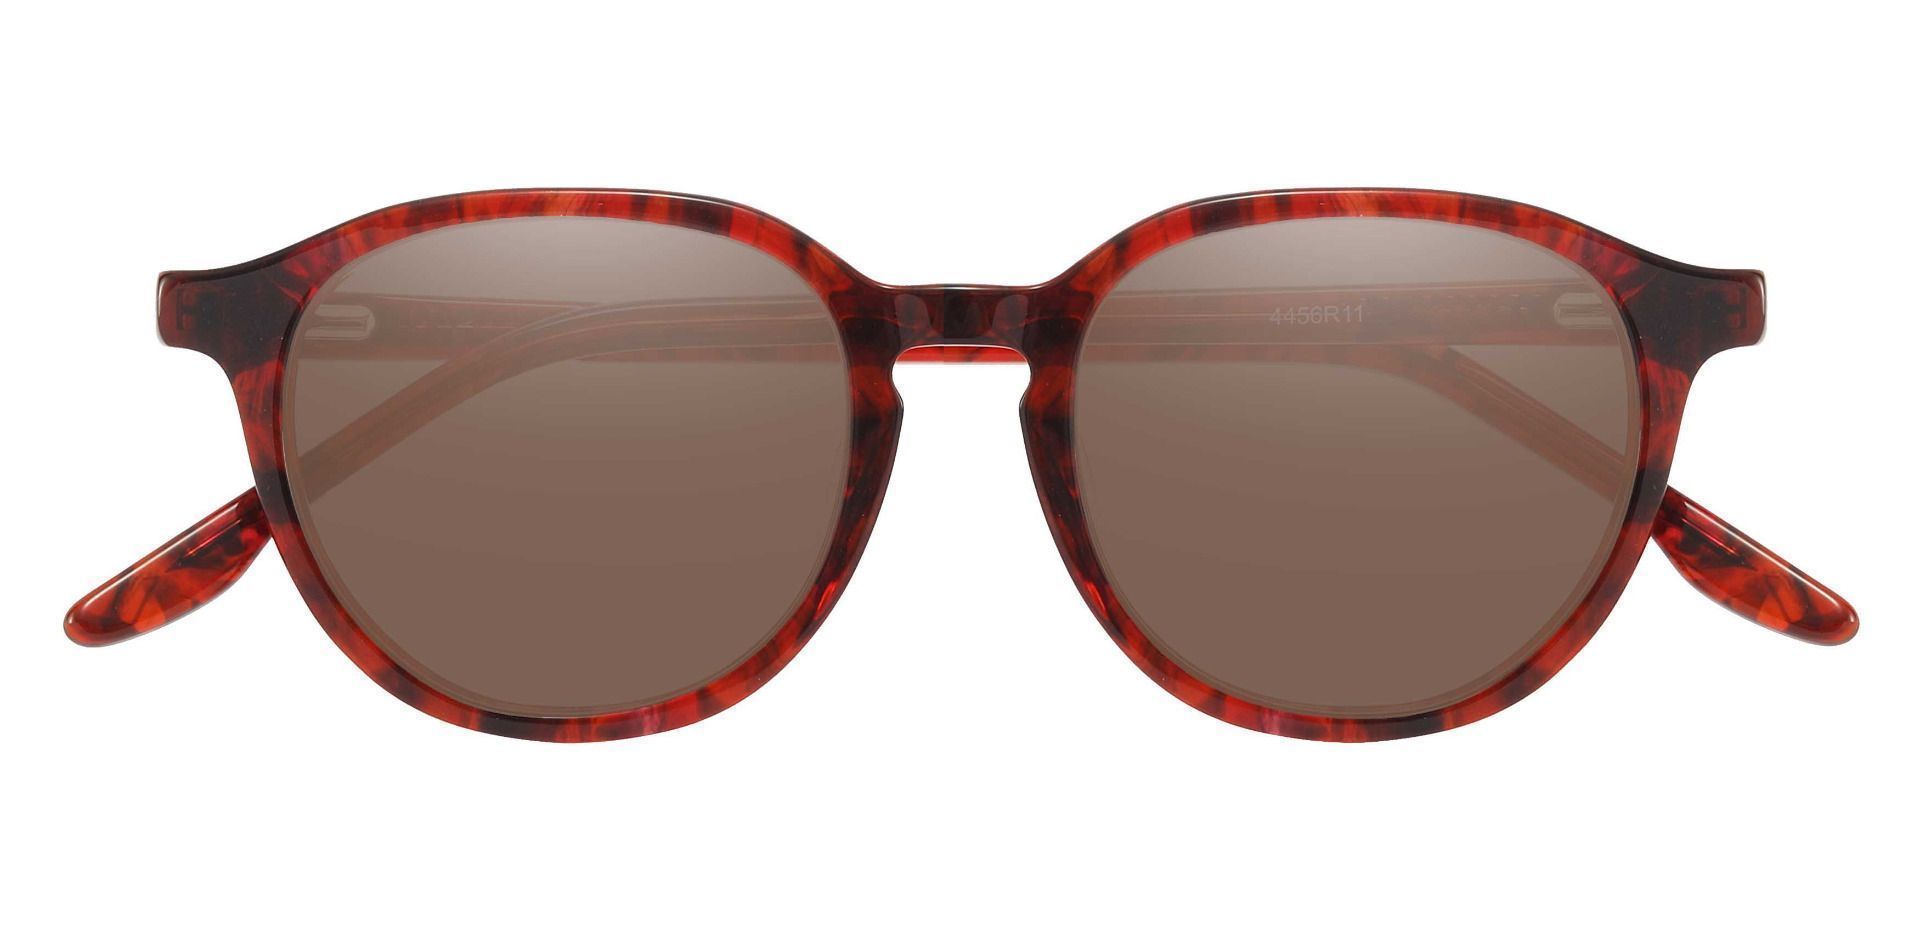 Ashley Oval Non-Rx Sunglasses - Red Frame With Brown Lenses